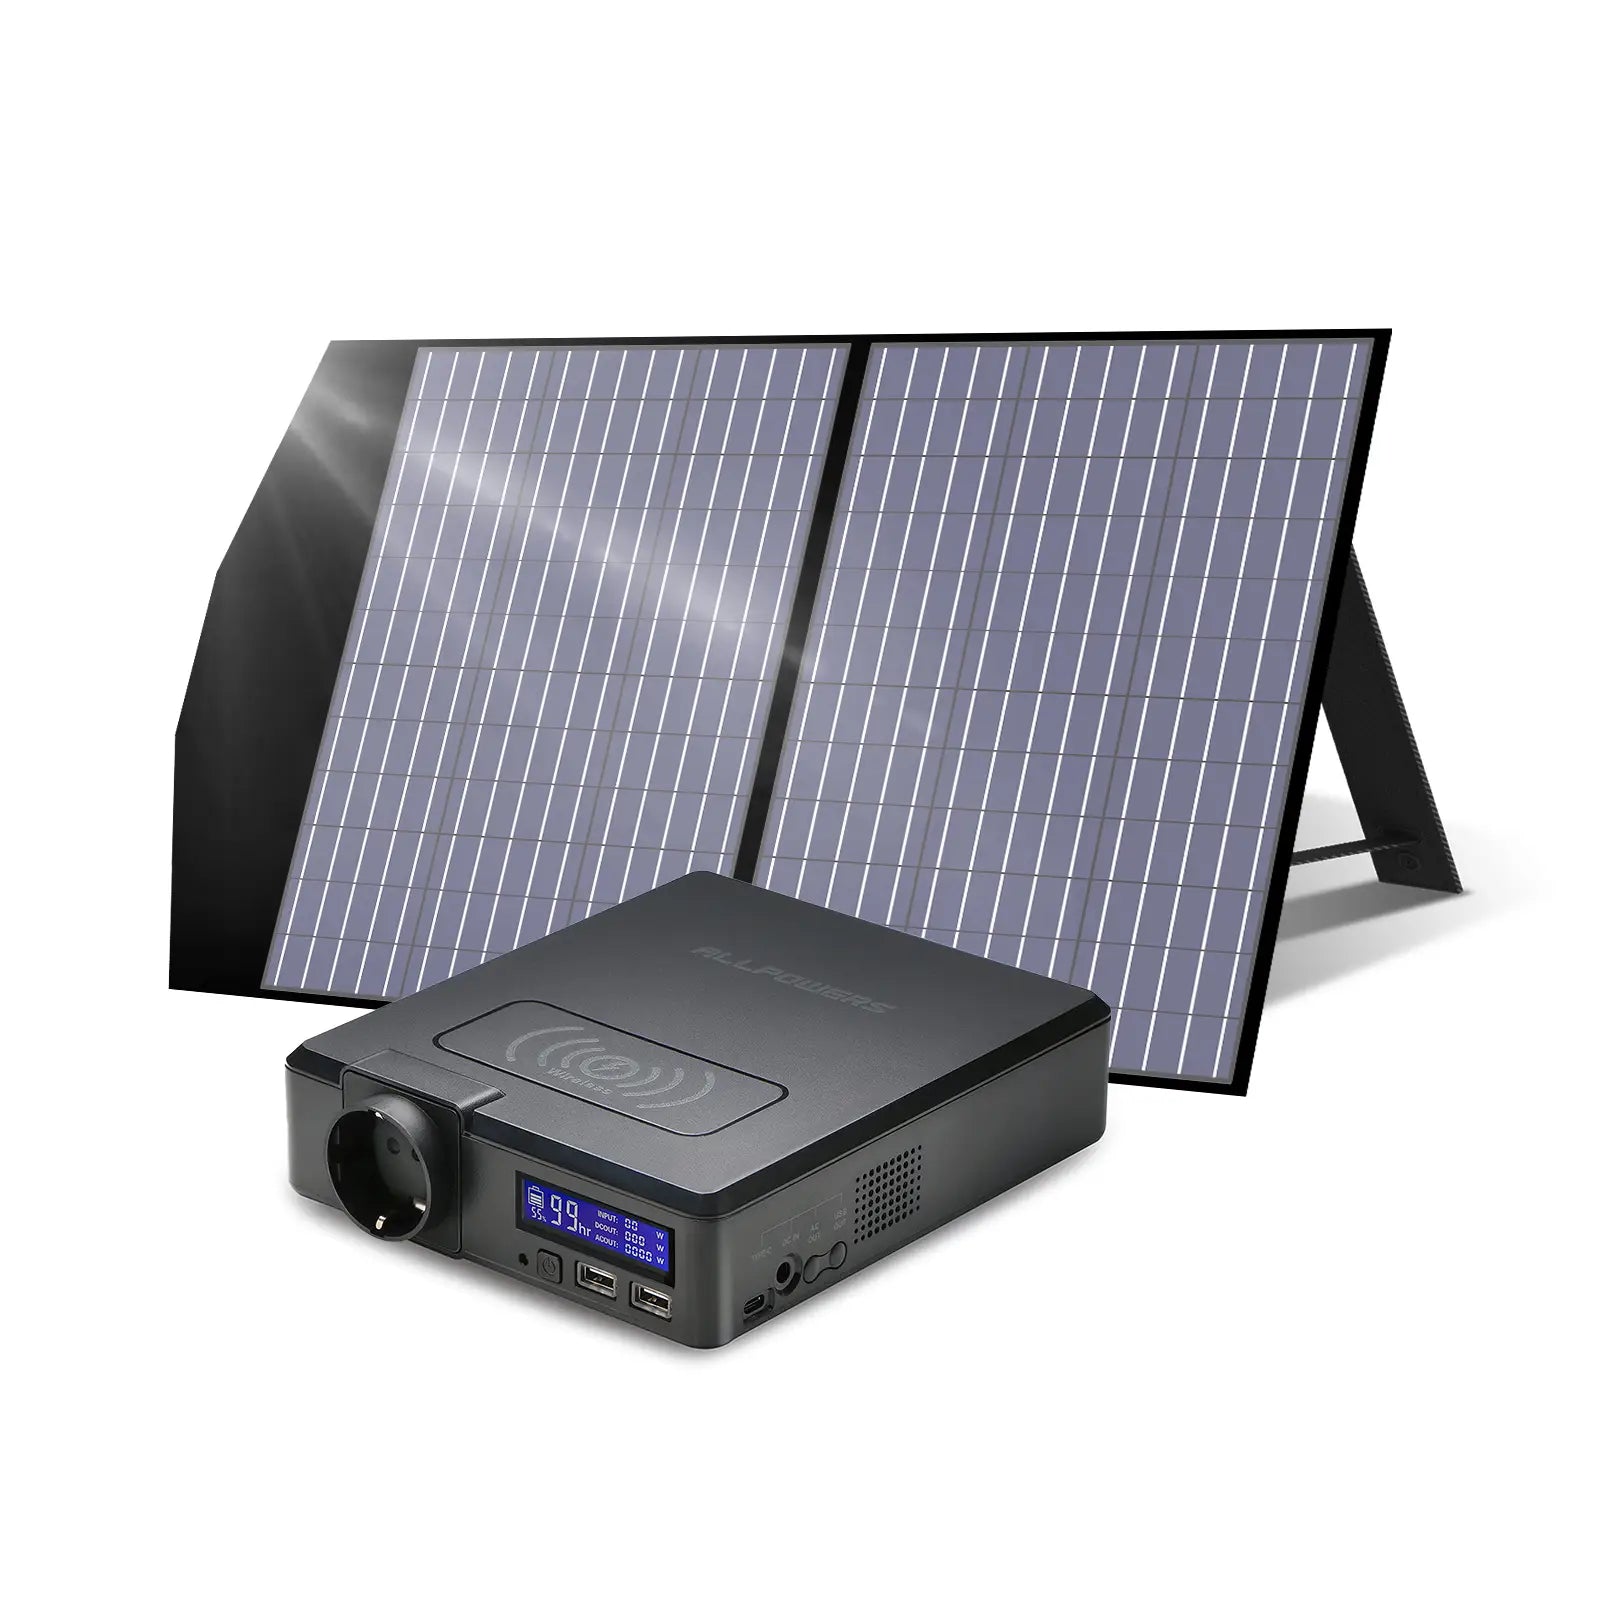 ALLPOWERS S200 Solar Generator Portable Power Bank 200W 154Wh with SP027 100W Solar Panel